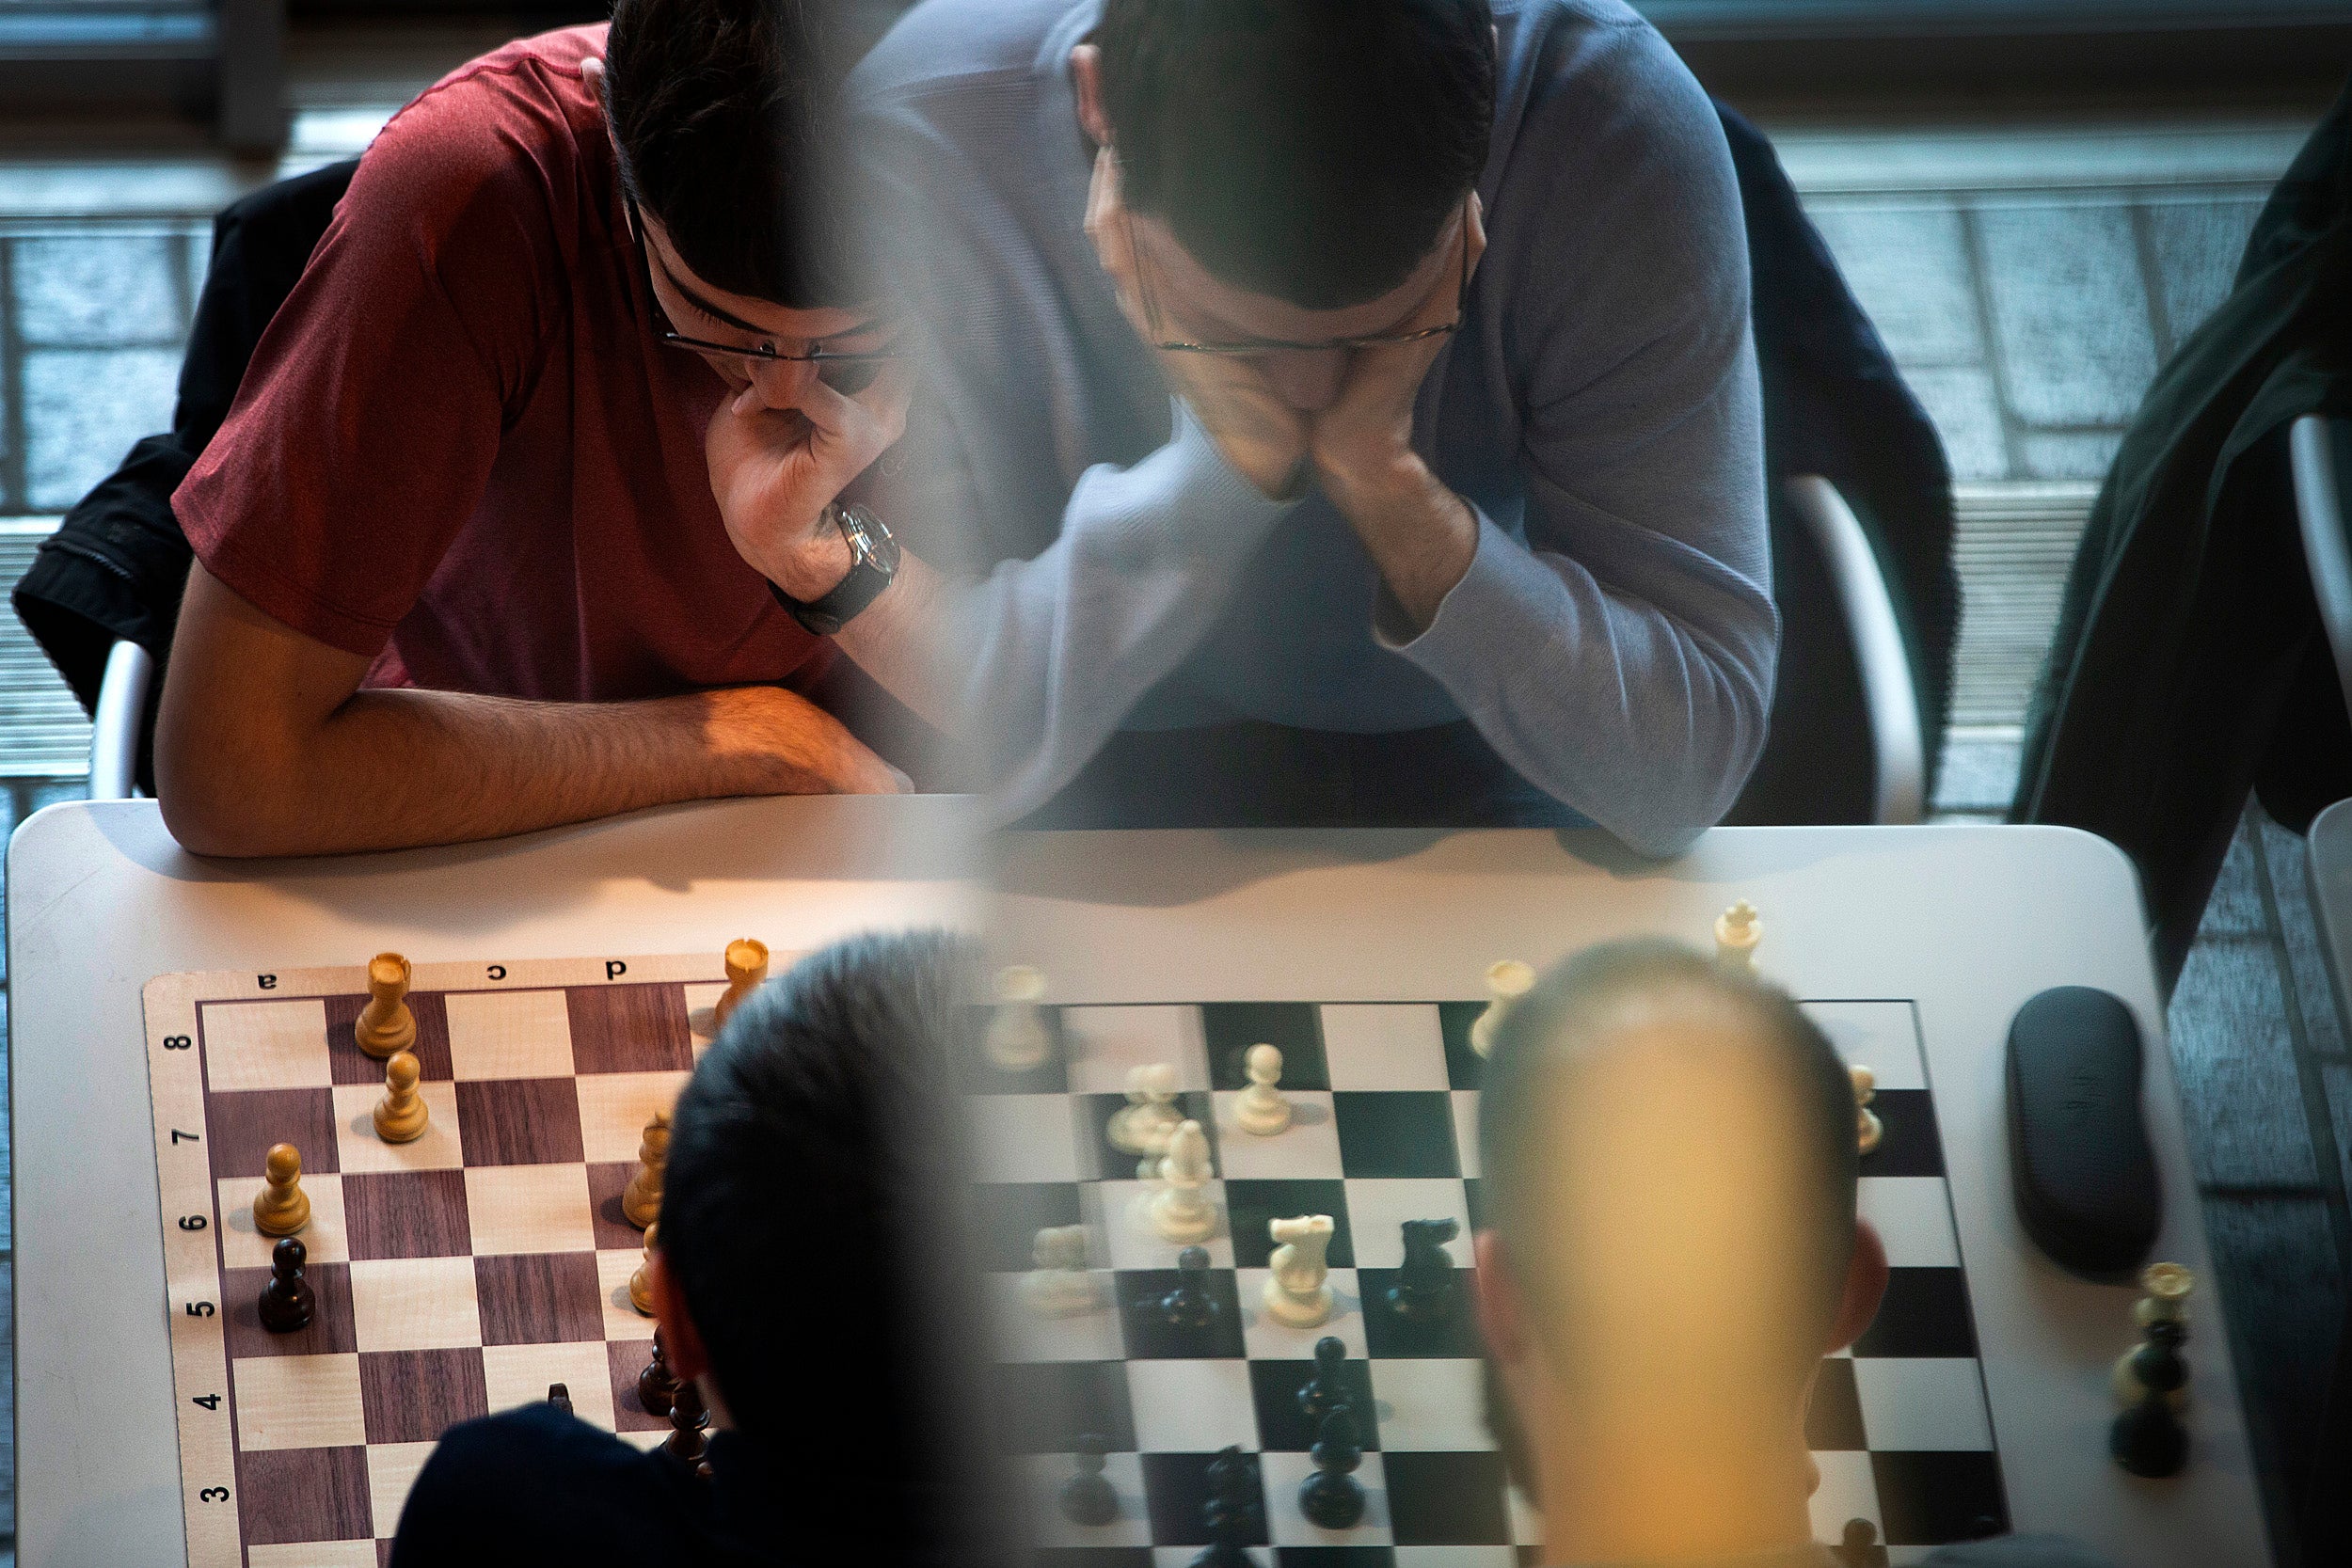 Chess players concentrate.